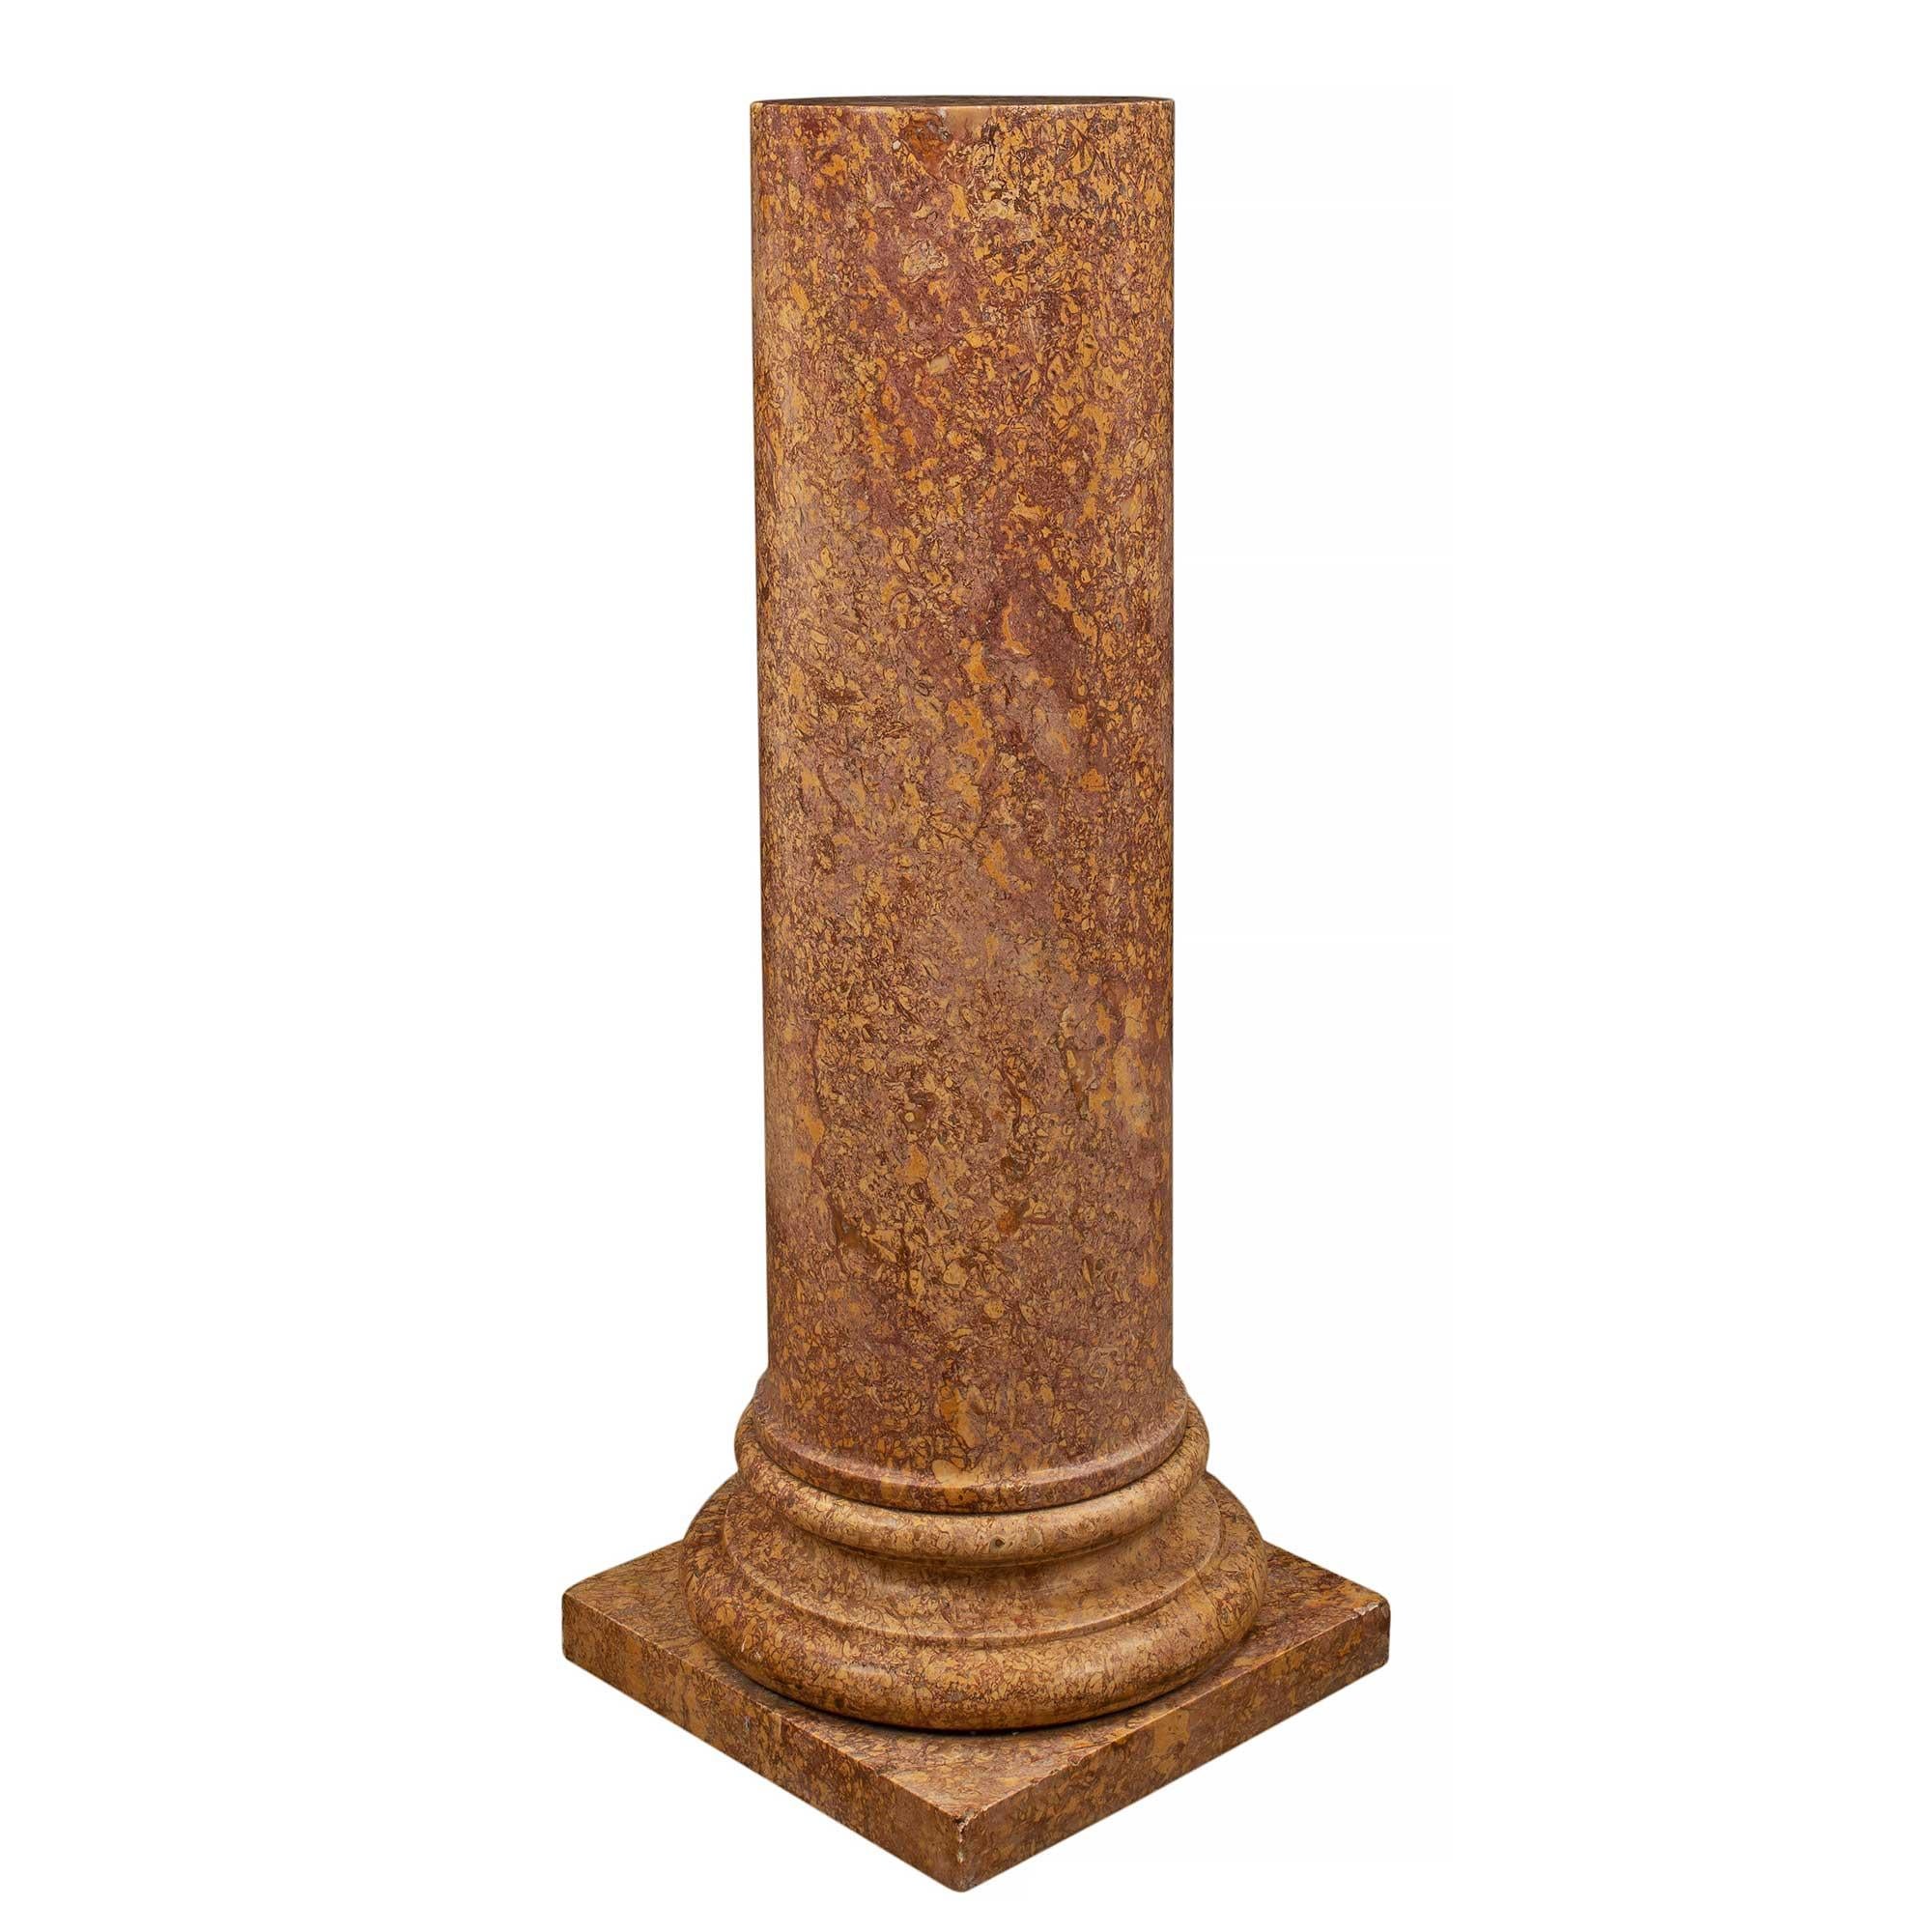 Italian 19th Century Neo-Classical St. Marble Pedestal Columns In Good Condition For Sale In West Palm Beach, FL